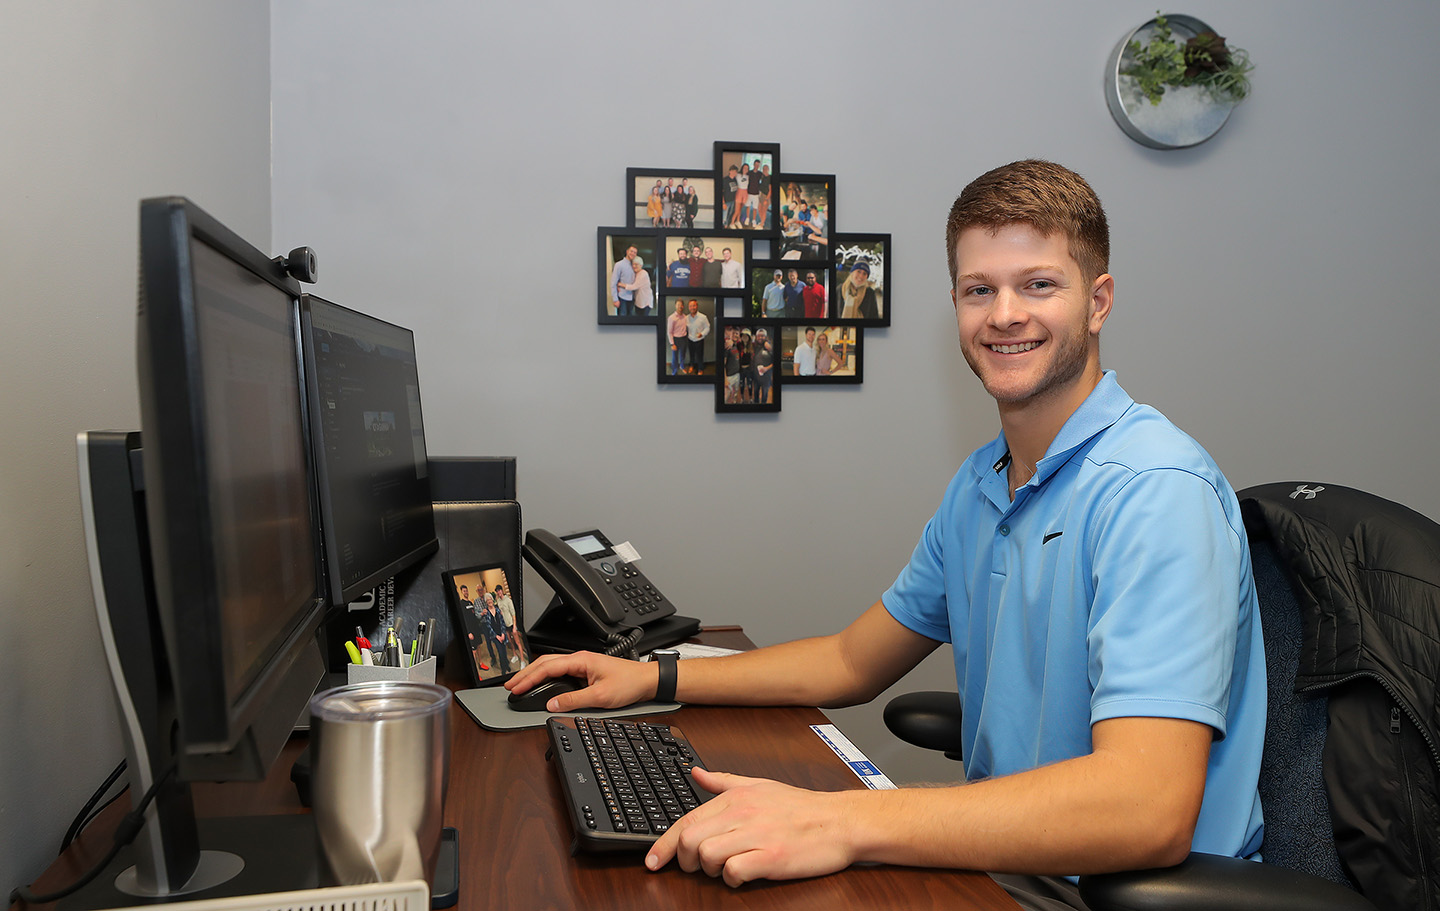 Logan Krejdl, a 2019 UNK graduate, now works as an academic and career adviser on campus.